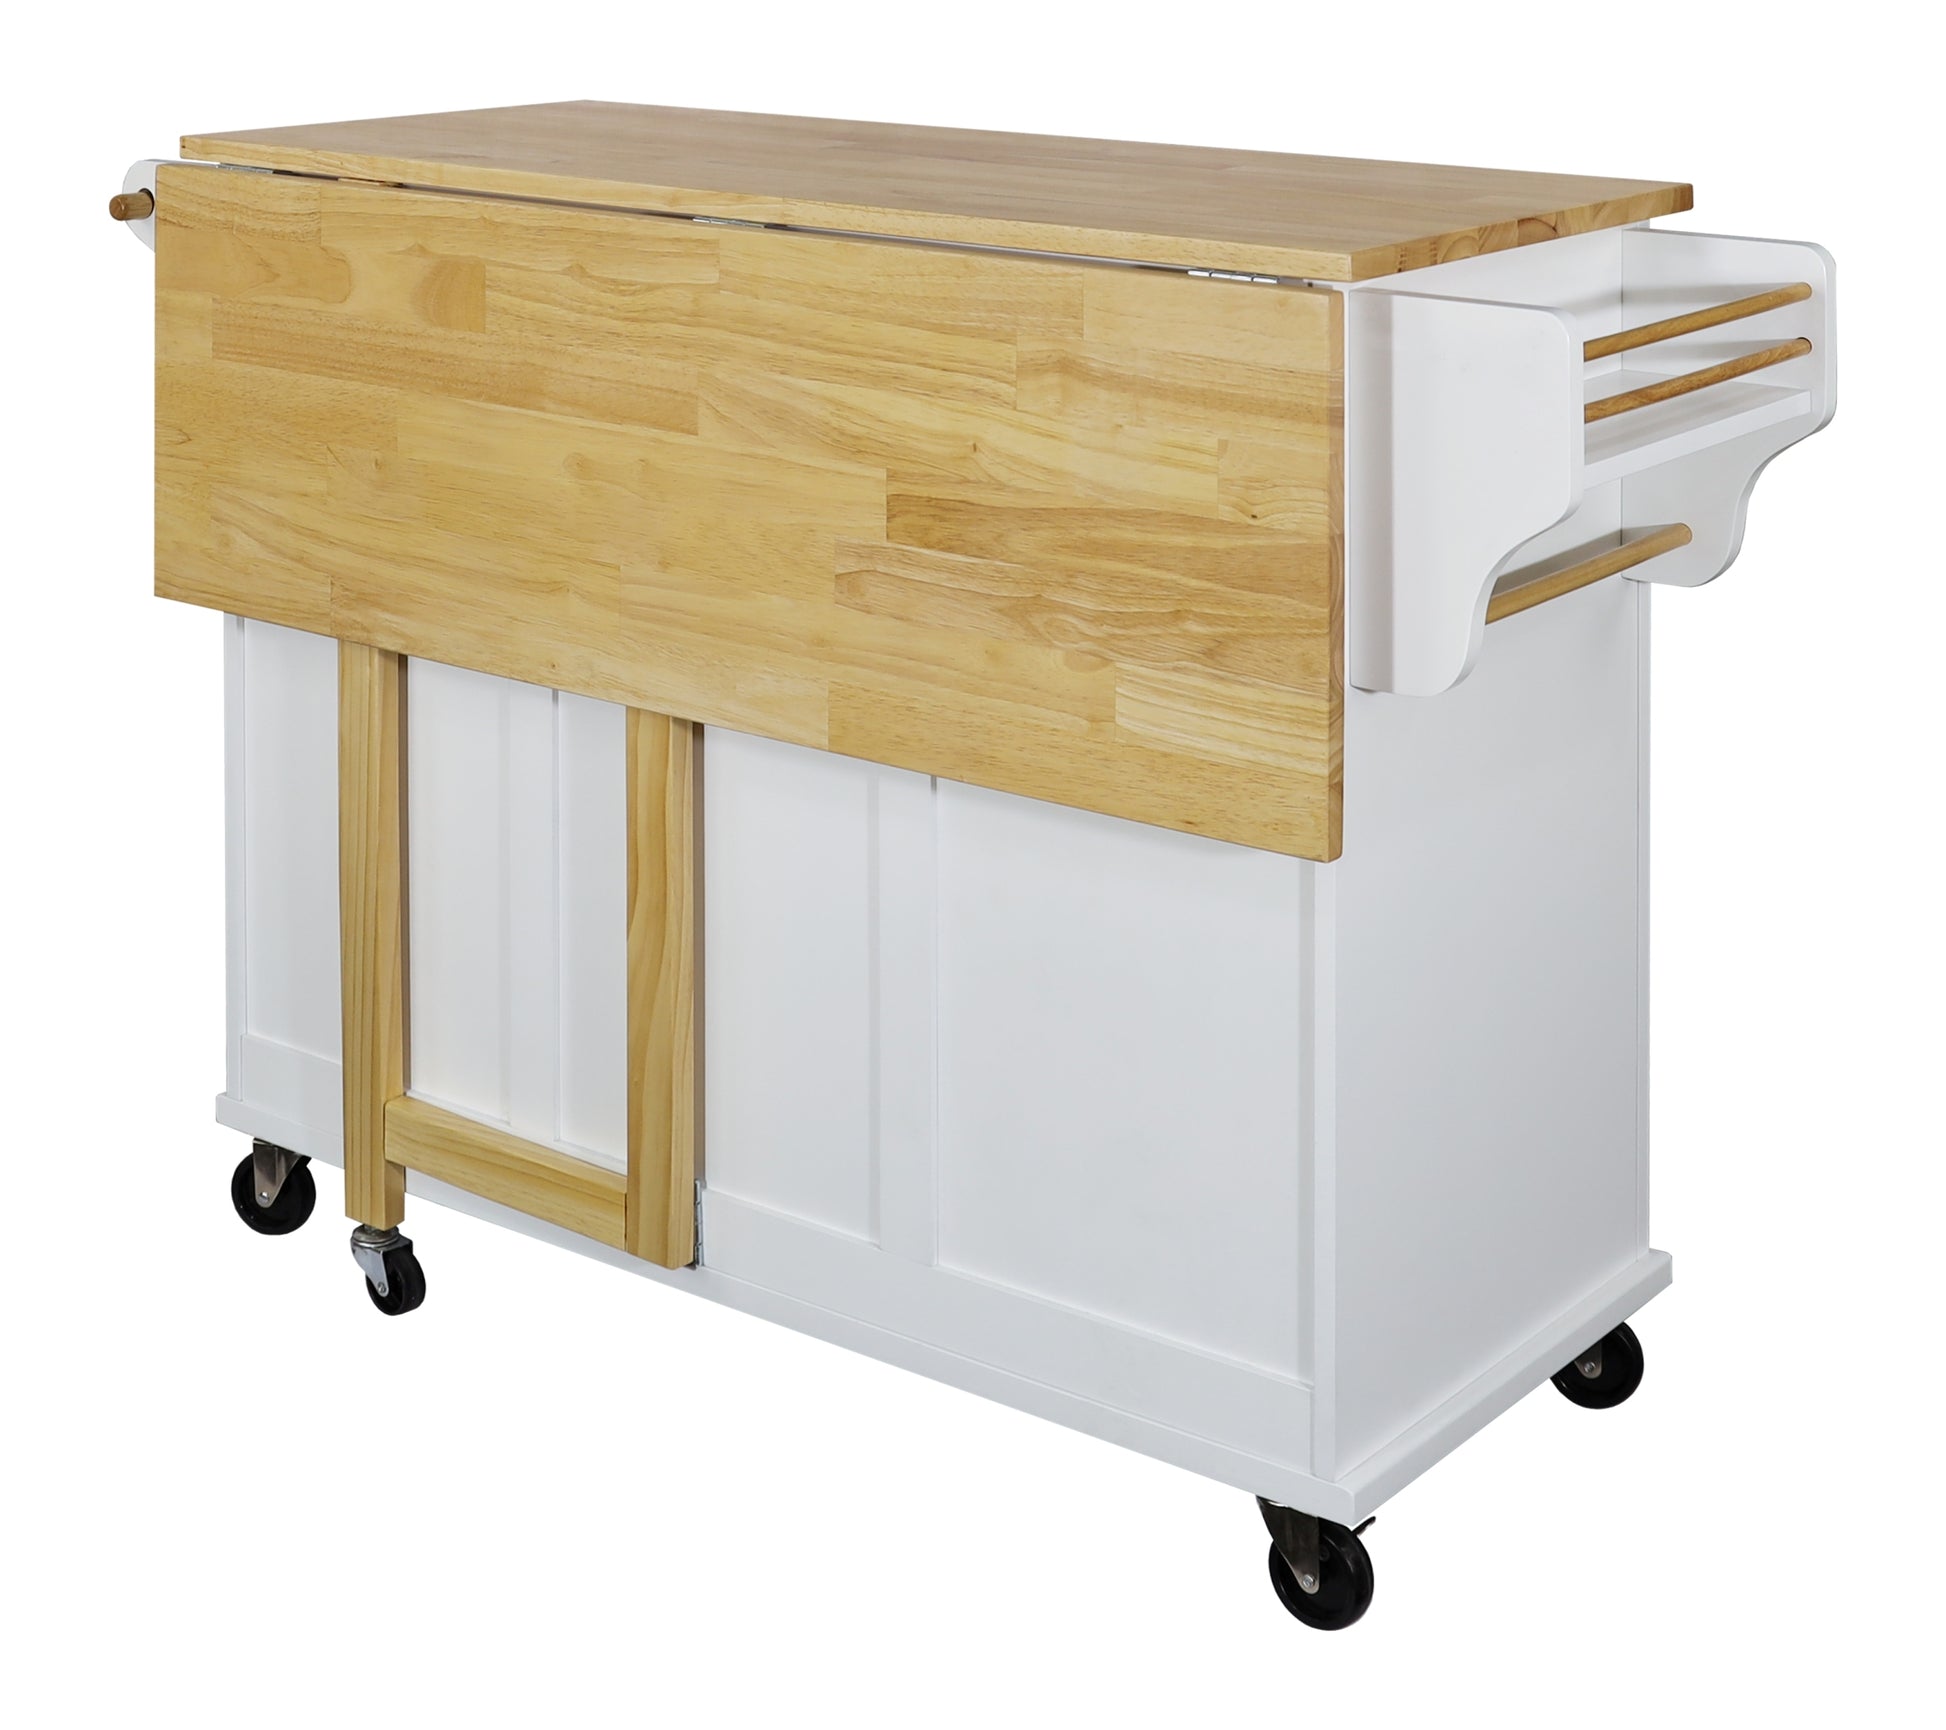 Cambridge Natural Wood Top Kitchen Island with Storage white-solid wood+mdf